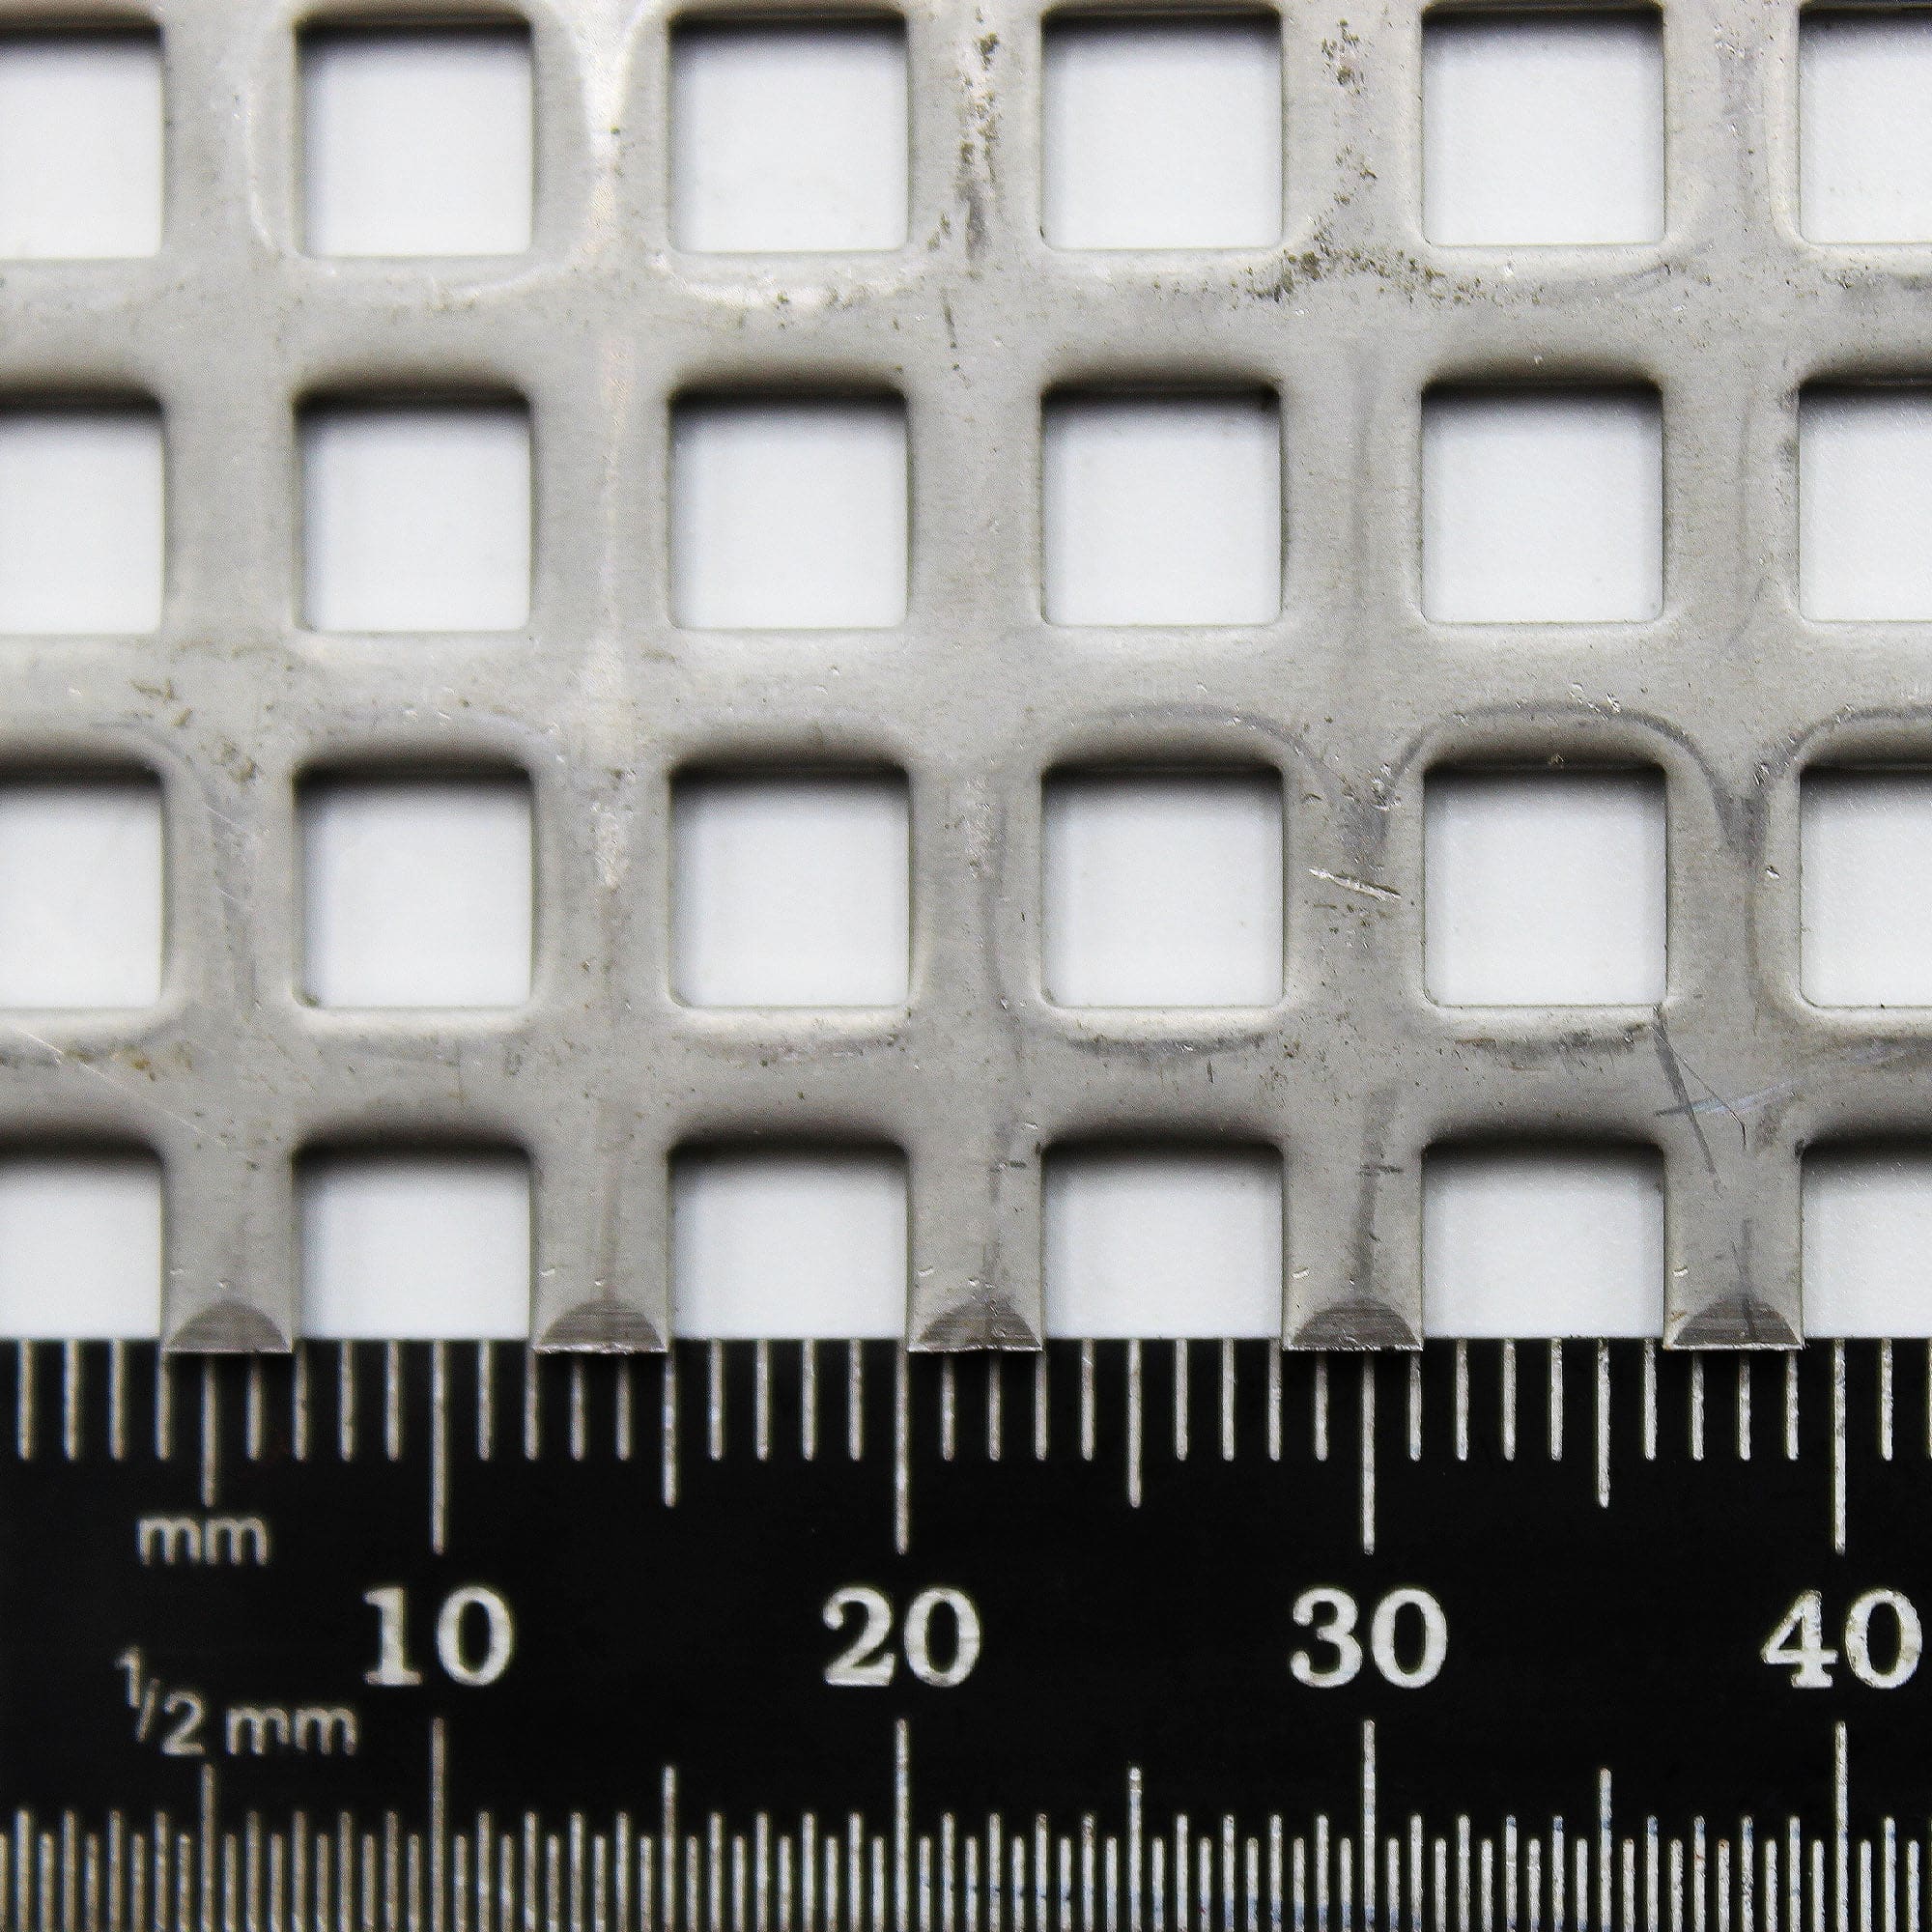 10mm Square Hole Perforated Steel Galvanised Mesh Panels - 12mm